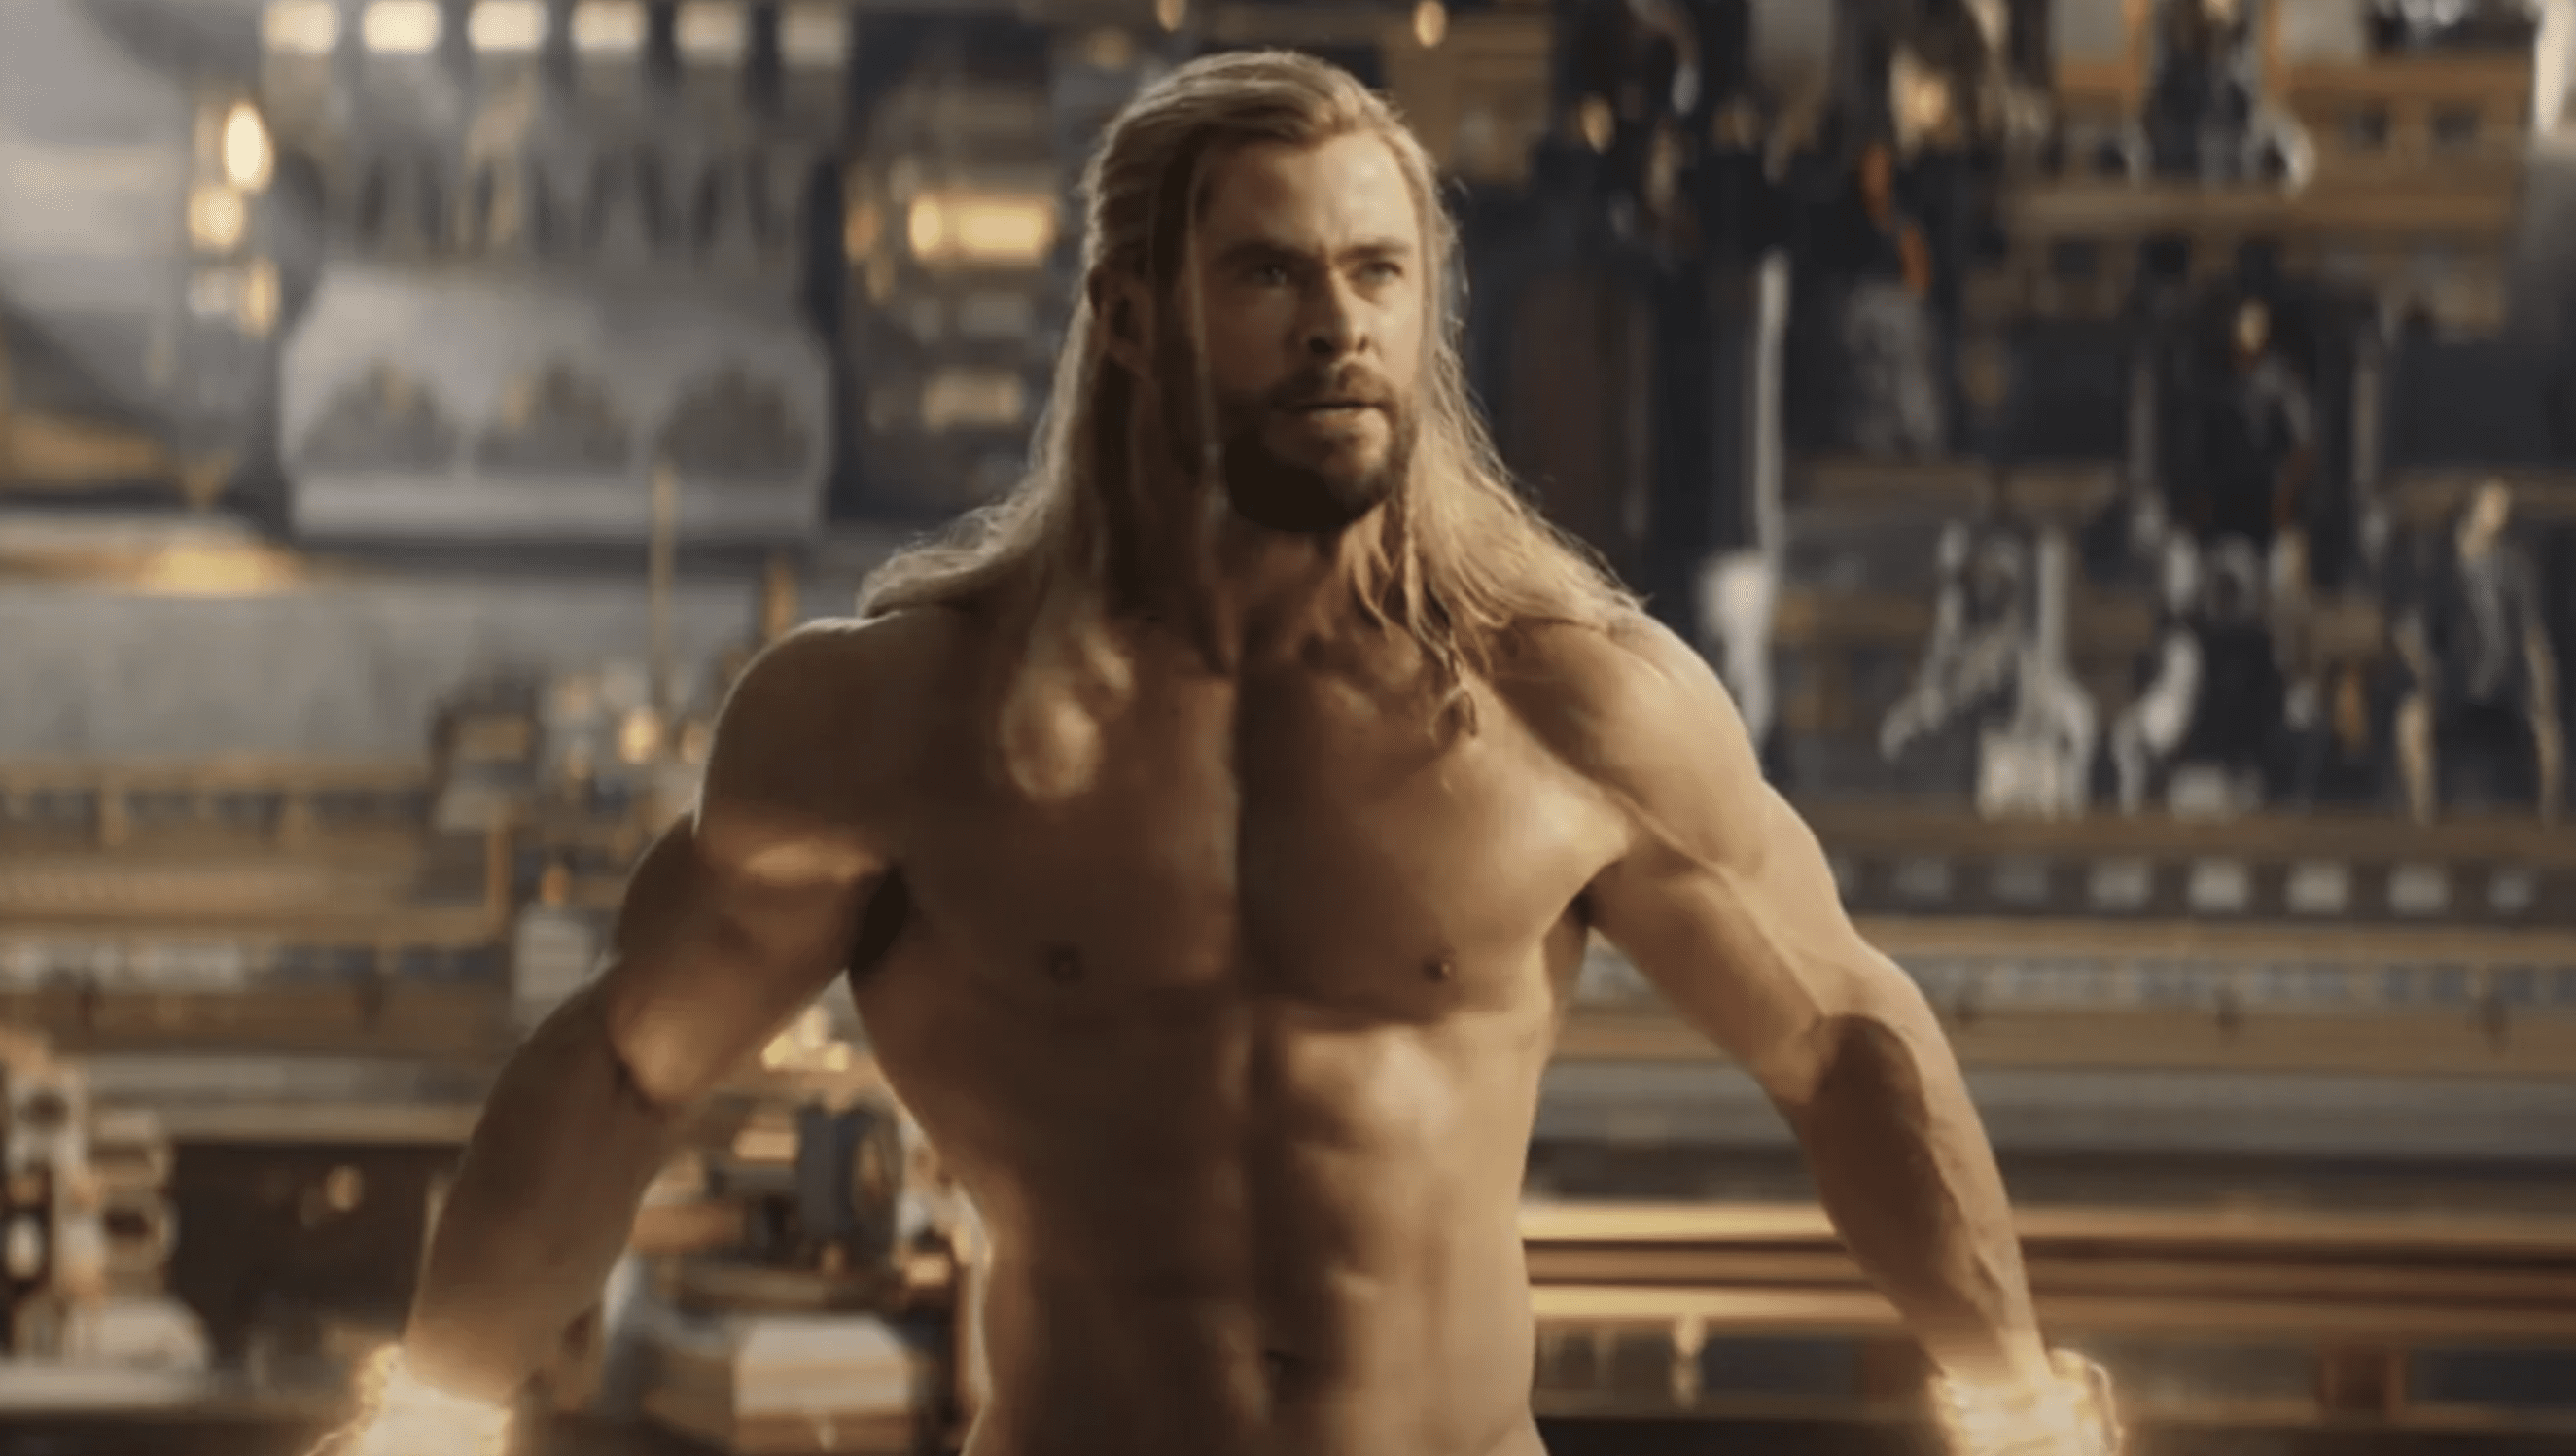 Chris Hemsworth Six Pack Abs Thor Workout